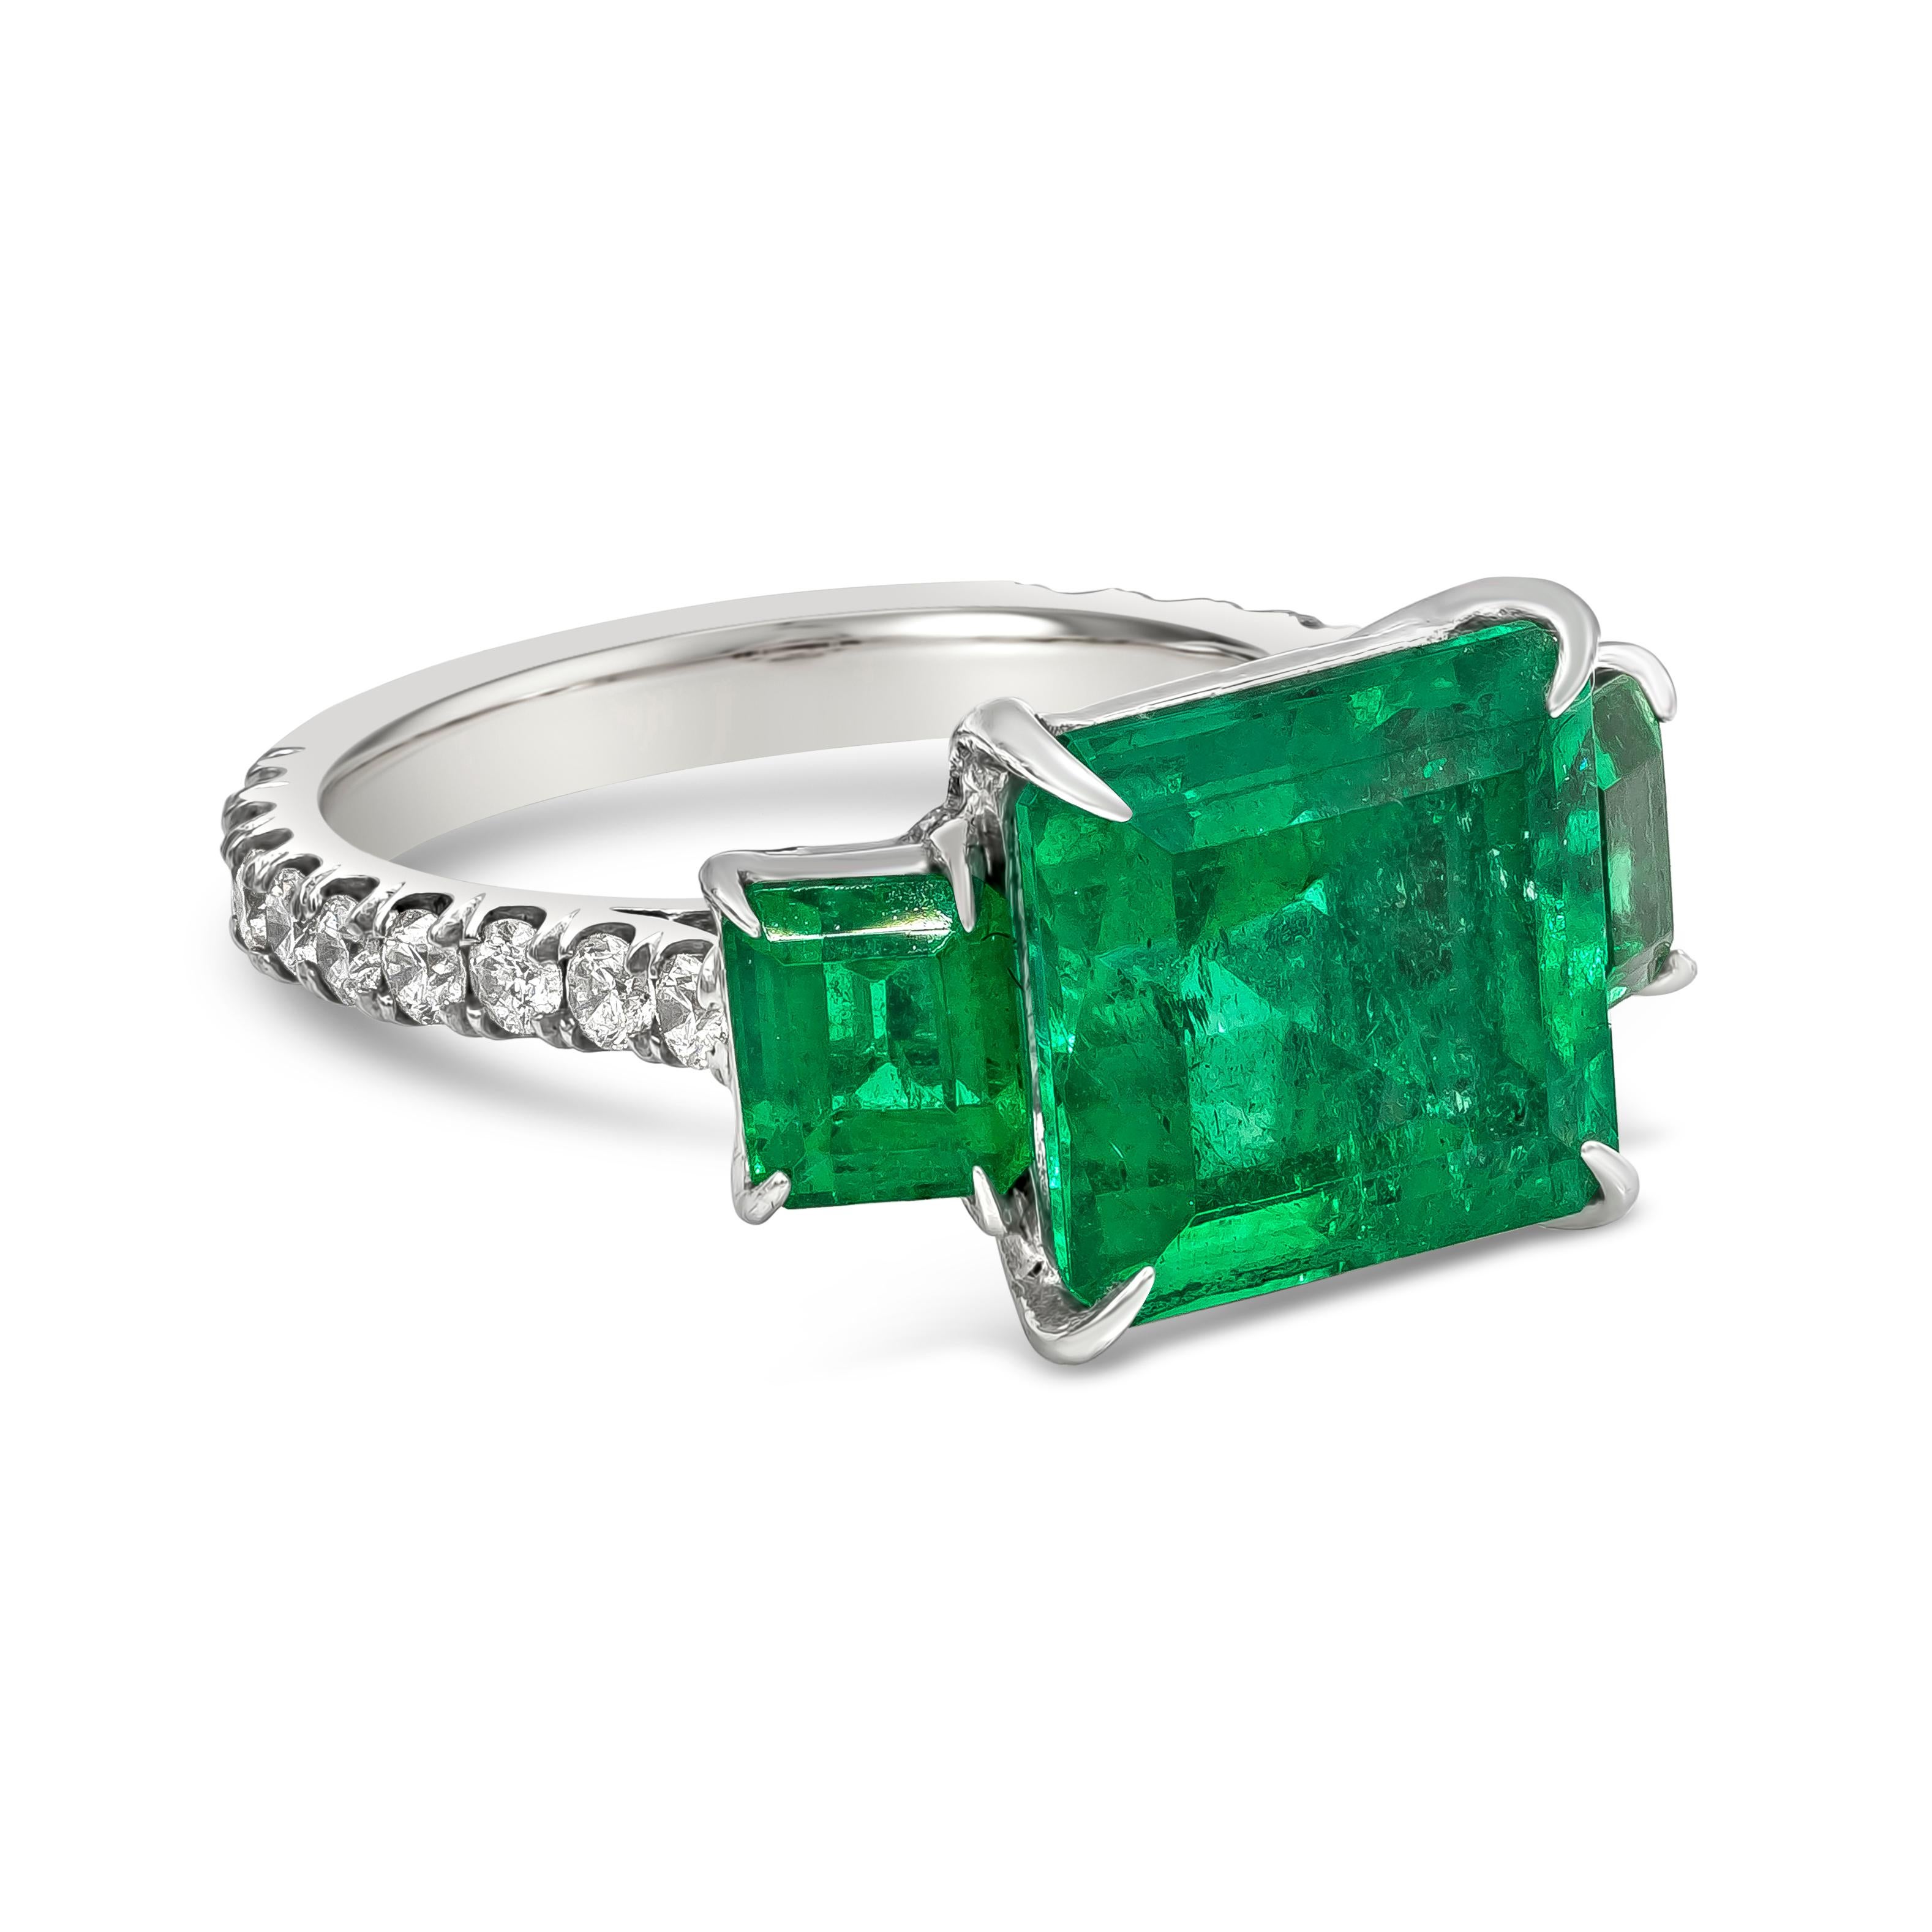 A color-rich and elegant three-stone engagement ring showcasing a GIA certified 4.82 carats emerald cut Colombian green emerald, set in a four prong basket setting. Flanked by two smaller emerald cut green emeralds on each side weighing 1.22 carats